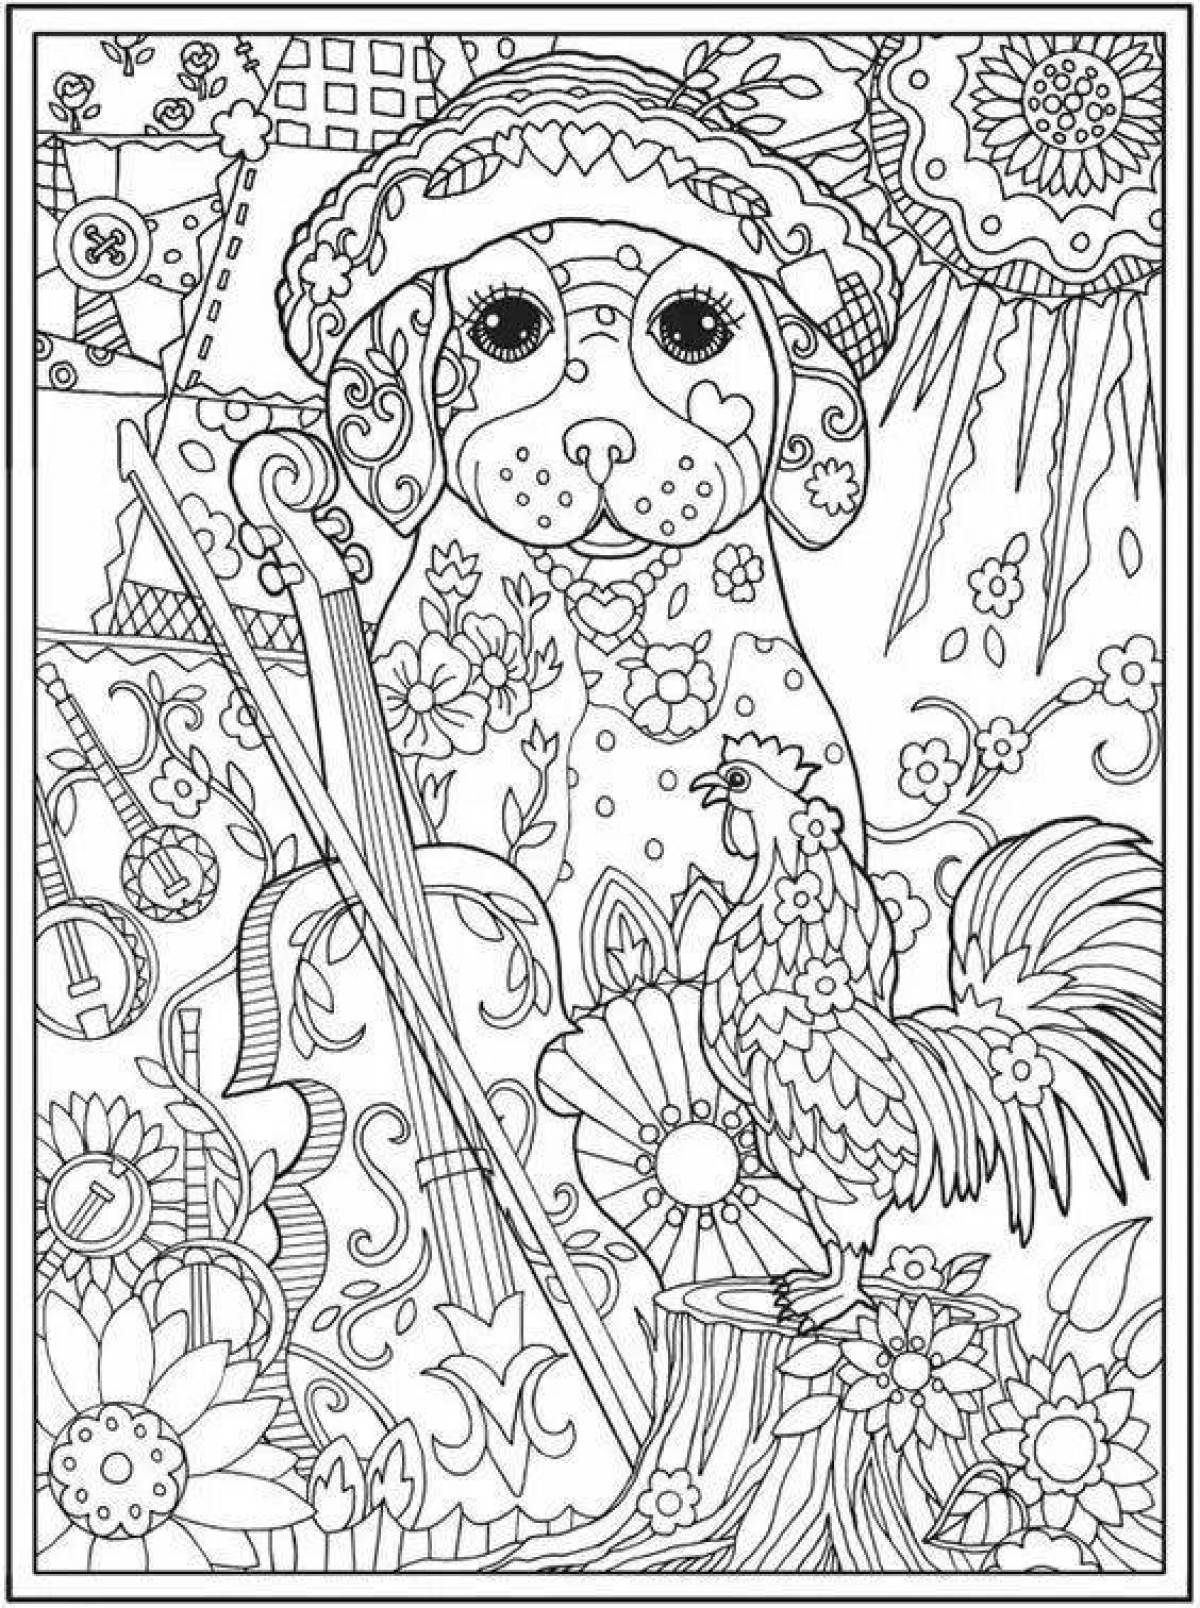 Colourful coloring pages of dogs for adults